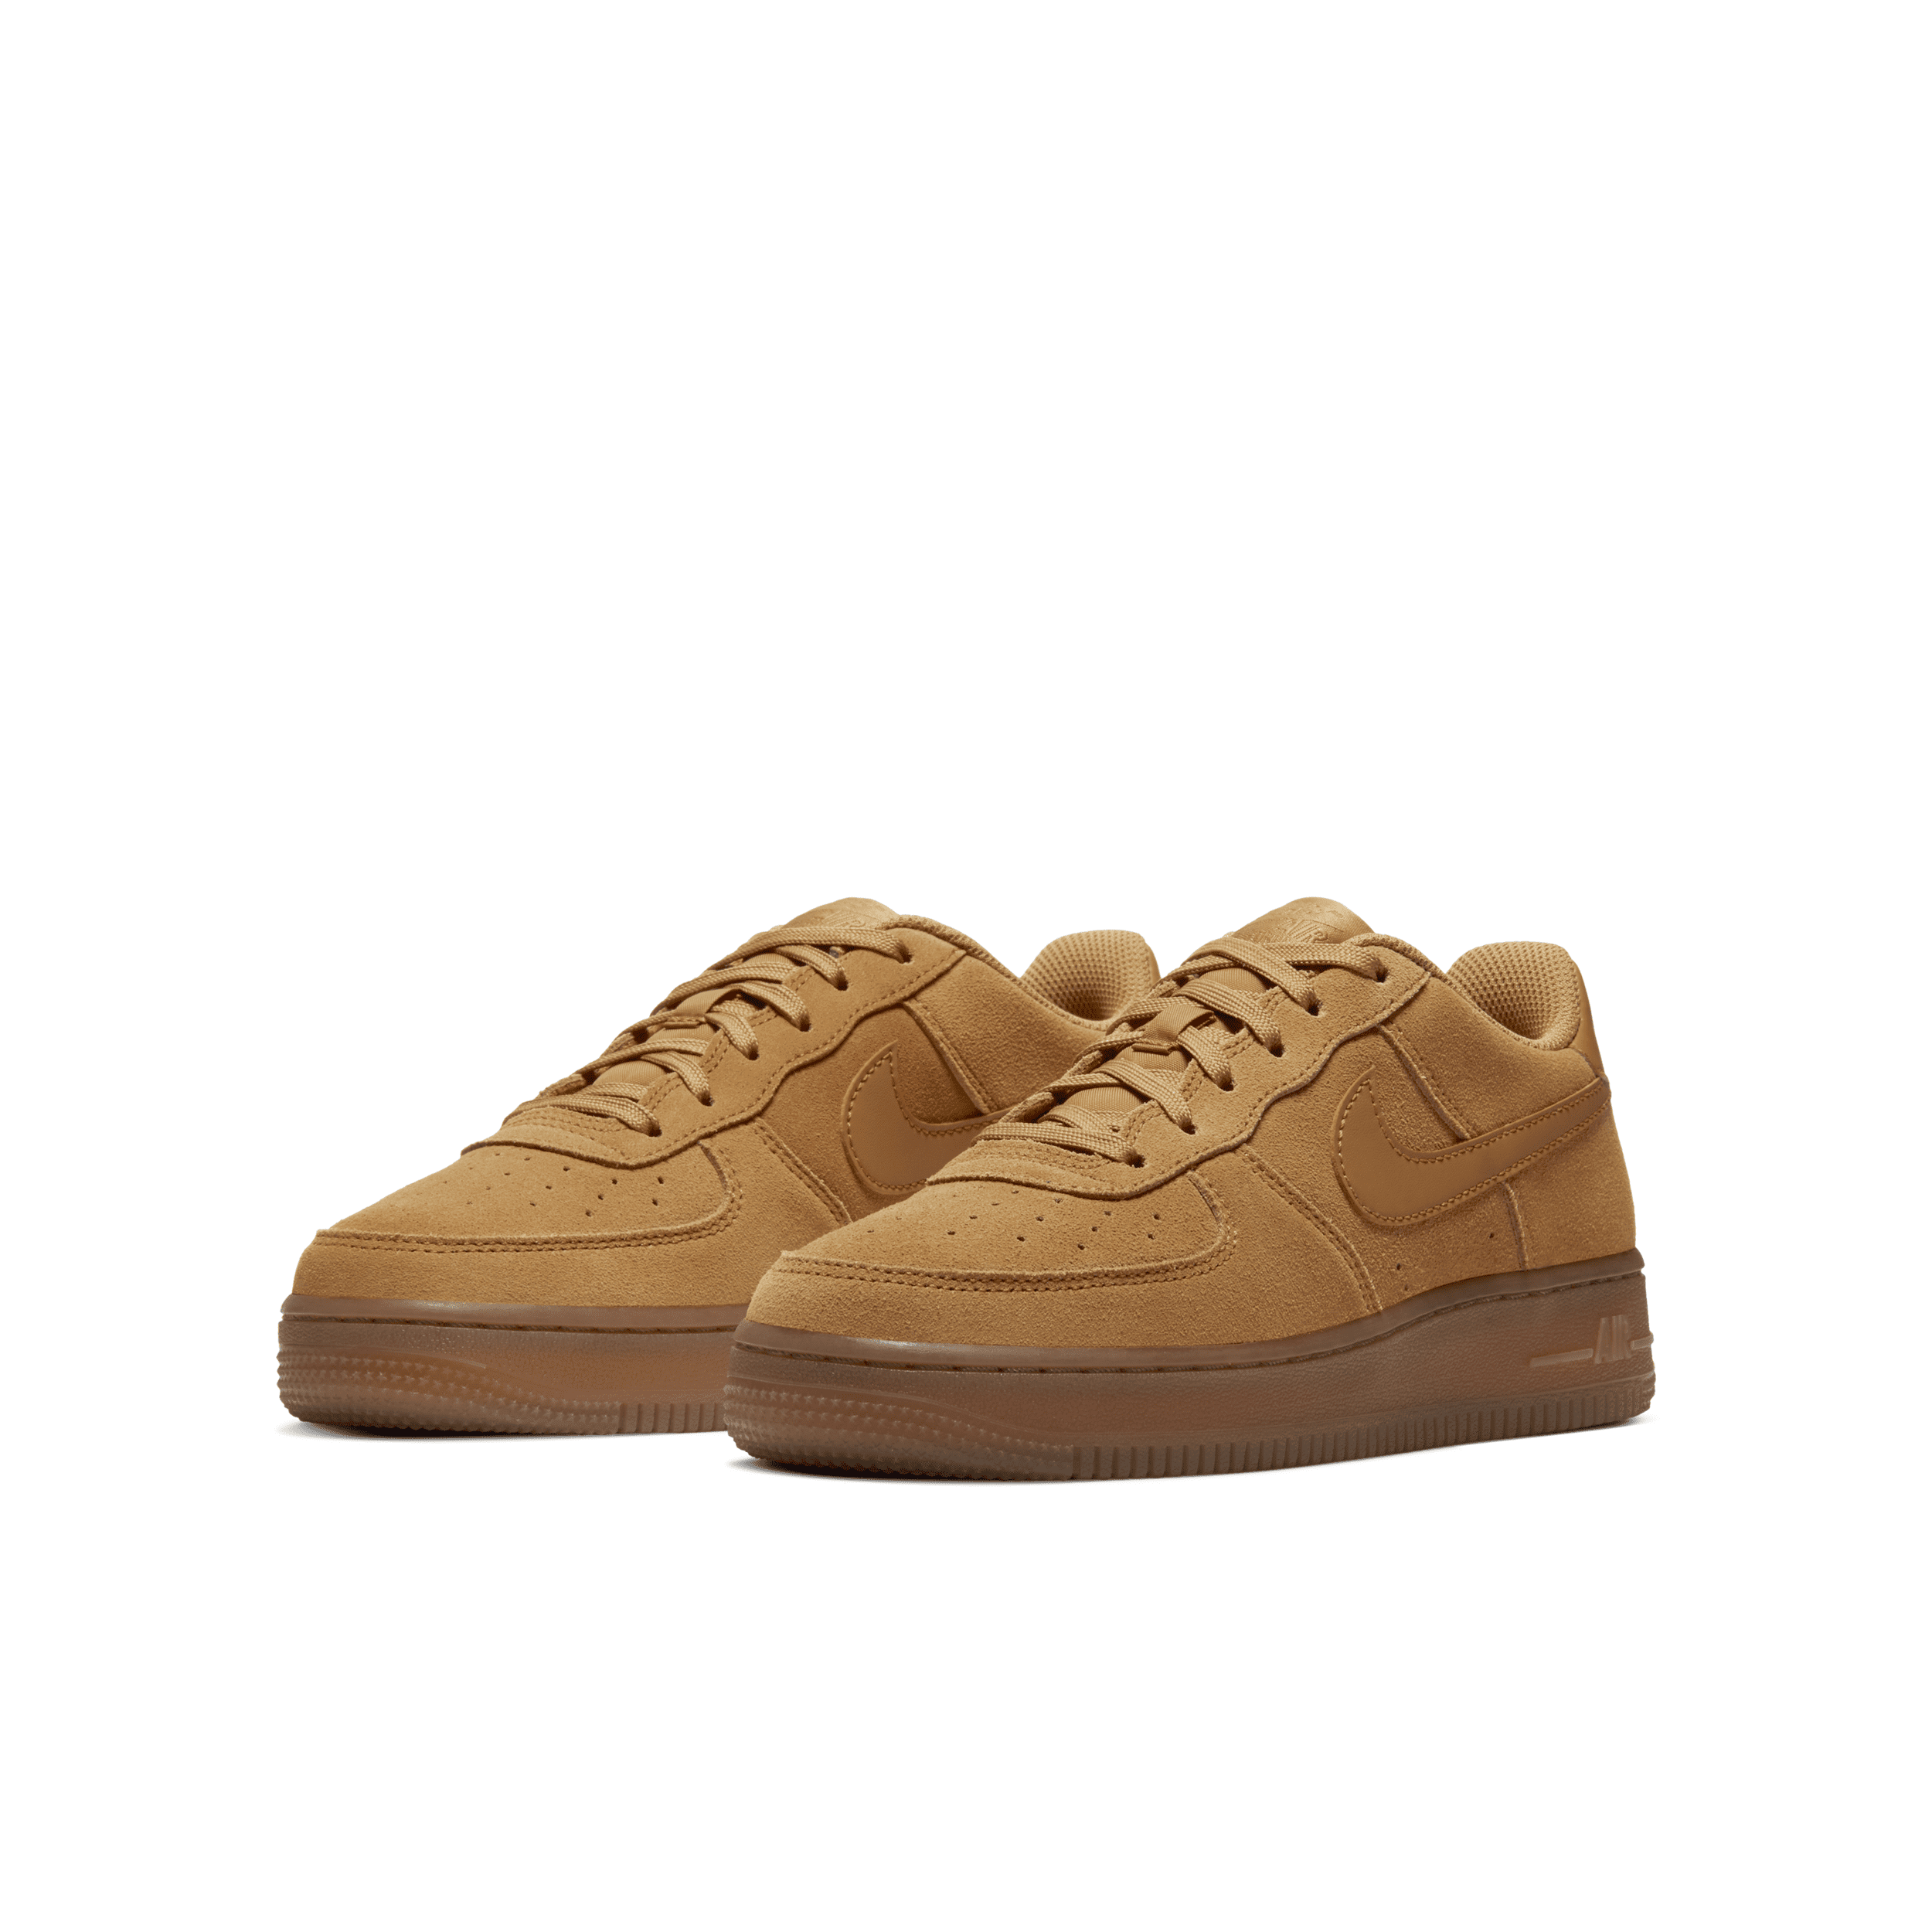 Nike Kids' Air Force 1 LV8 3 Shoes (Wheat) $54+ Free Shipping